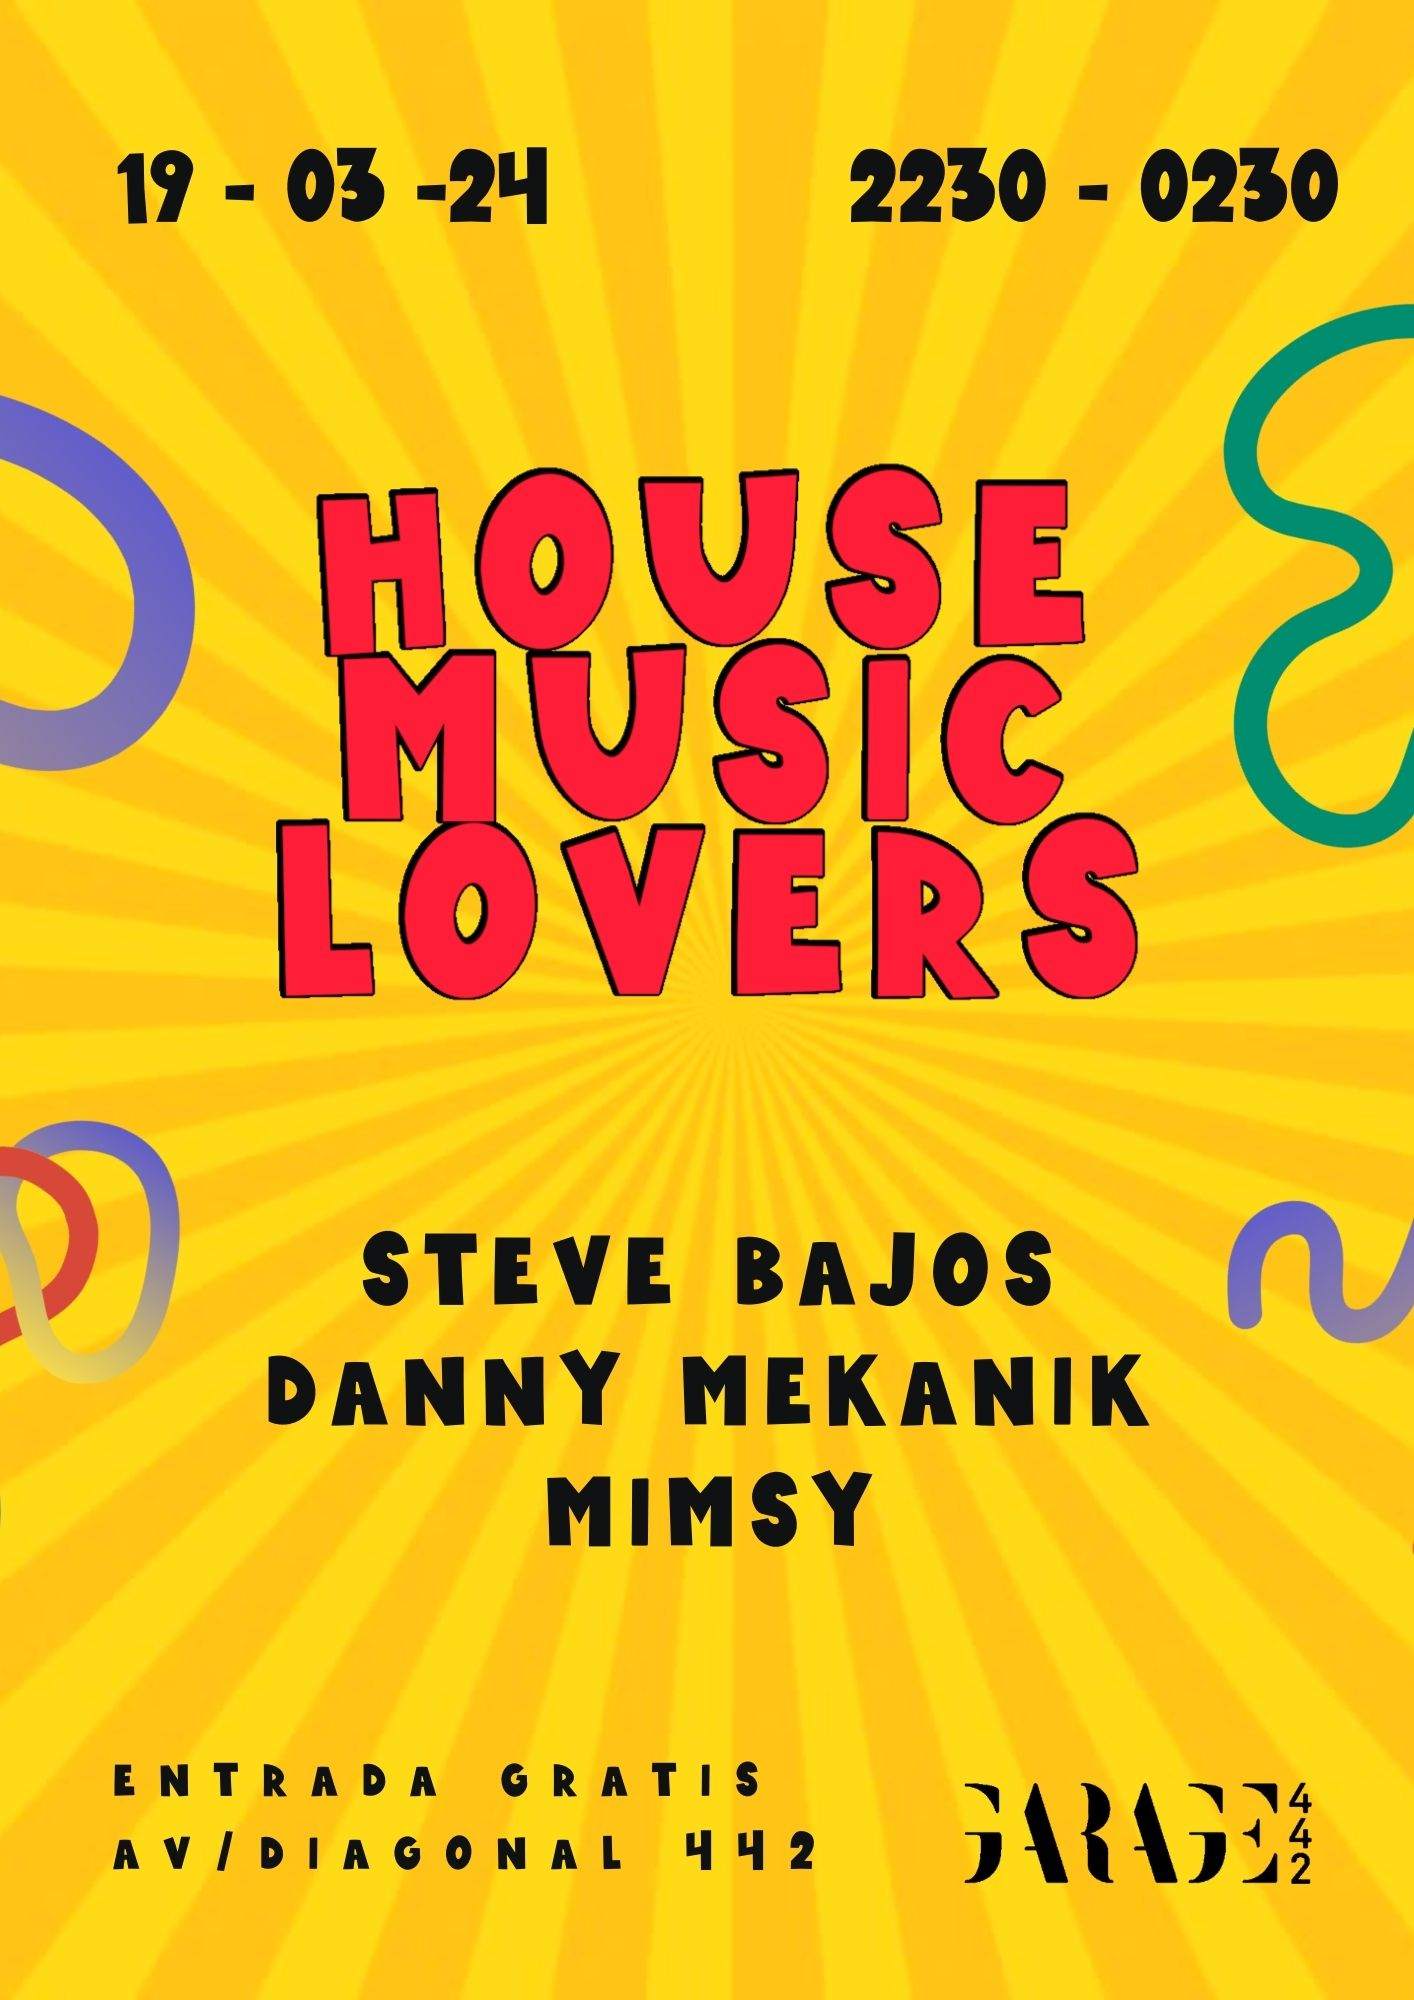 House Music Lovers with Danny Mekanik, Steve Bajos and Mimsy - フライヤー表